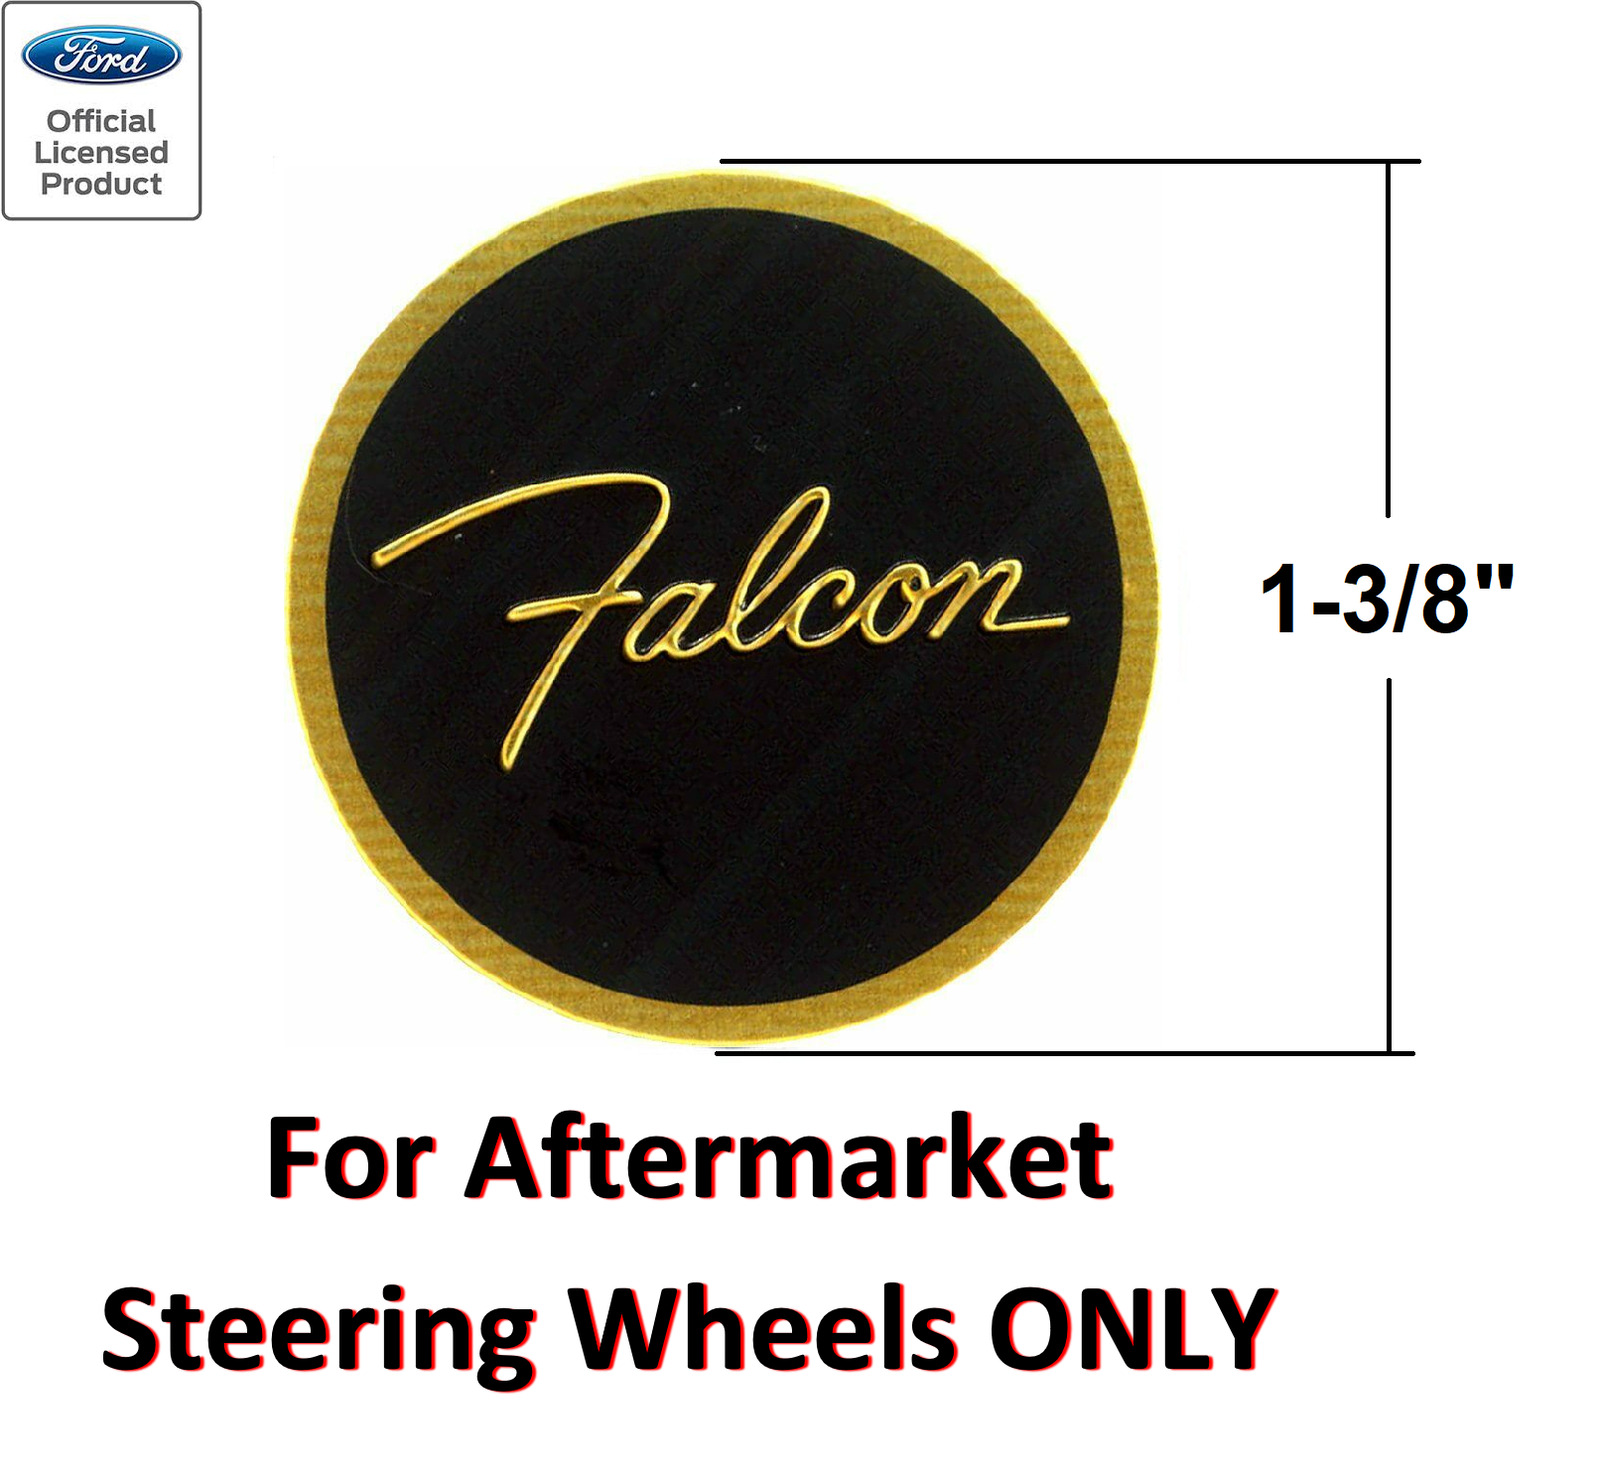 Ford Falcon Steering Wheel Horn Button Insert Decal - 1 3/8